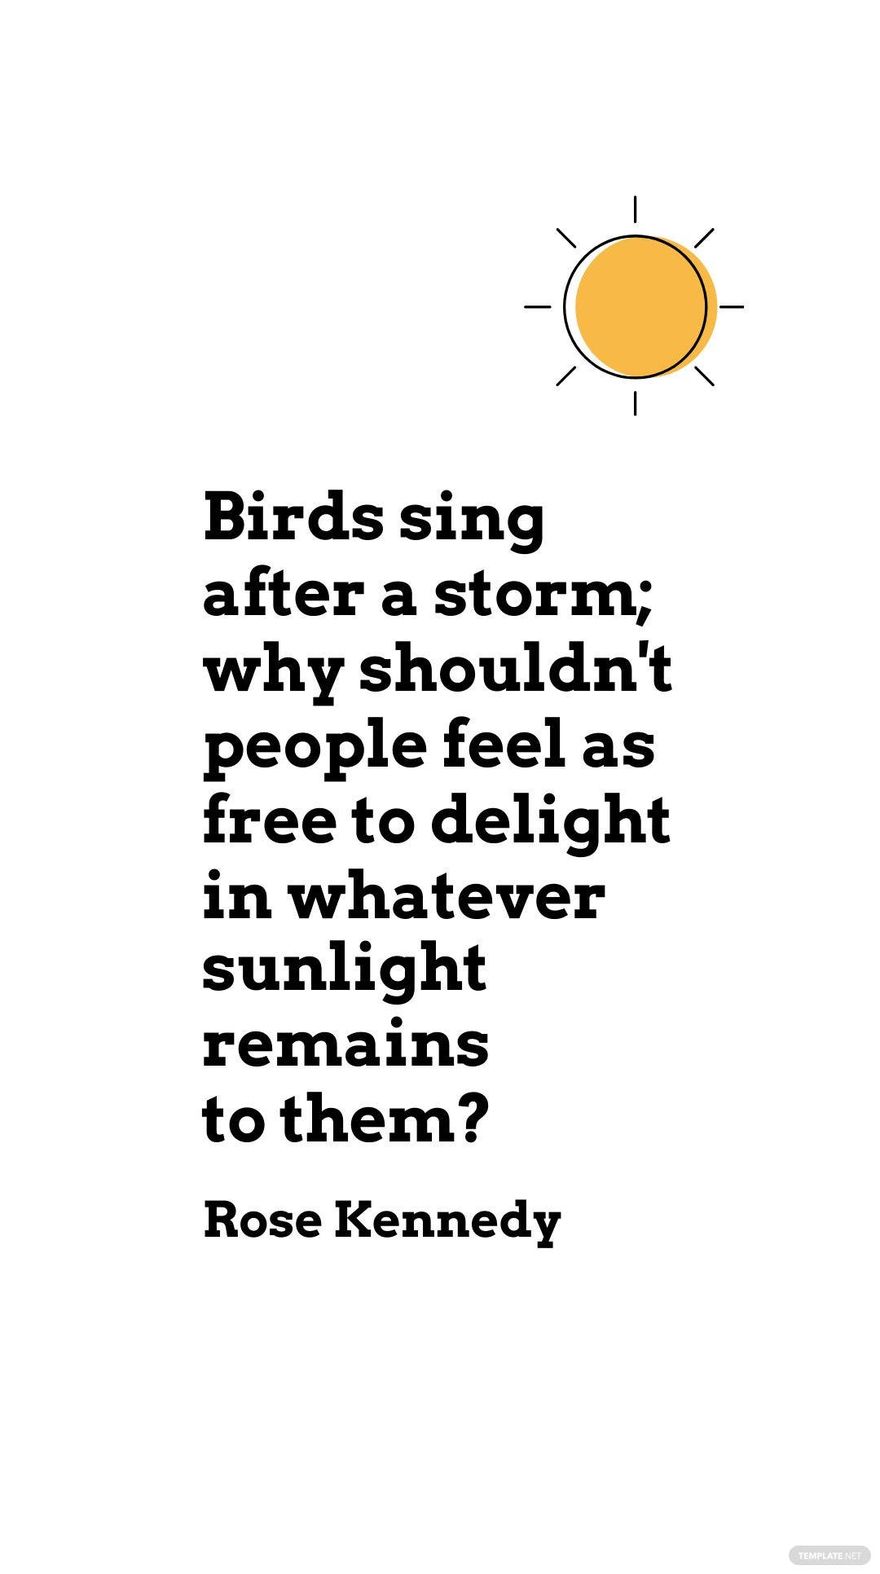 Free Rose Kennedy - Birds sing after a storm; why shouldn't people feel as to delight in whatever sunlight remains to them? in JPG